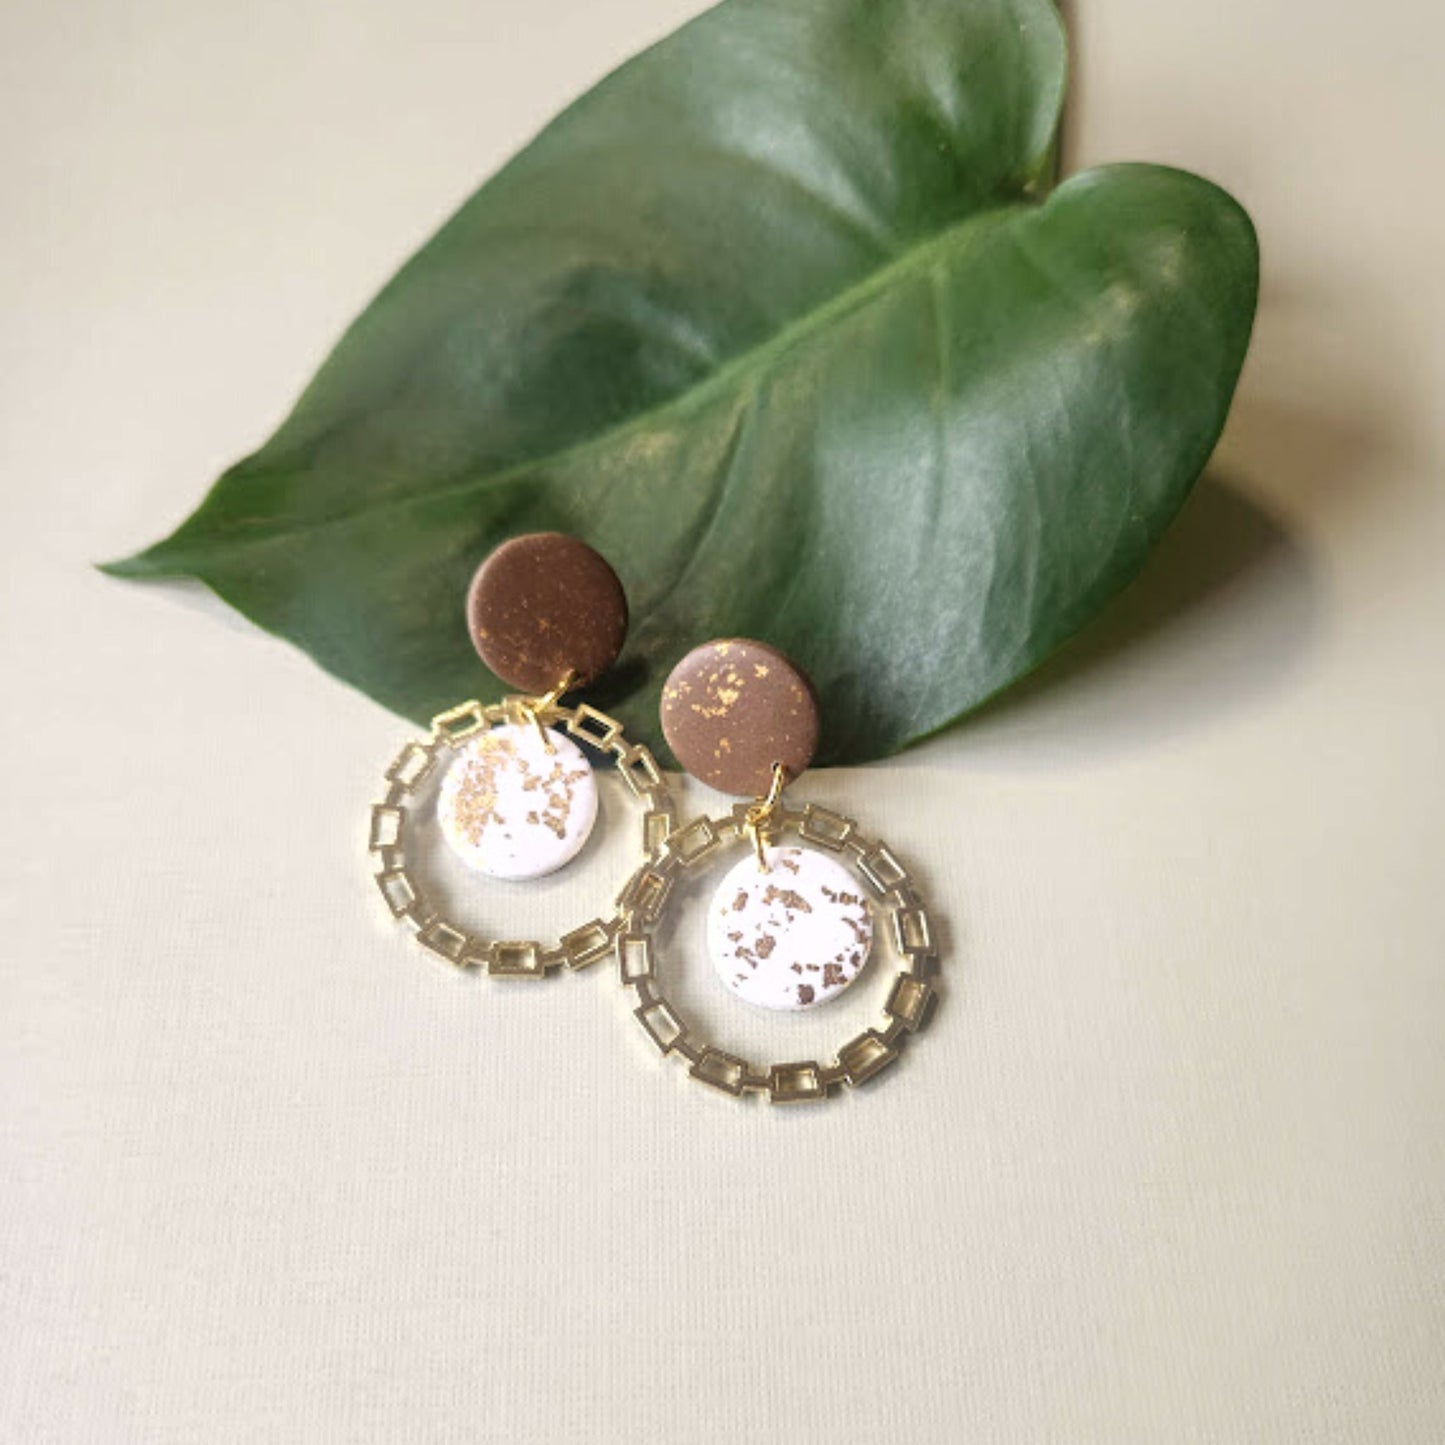 The Luna Polymer Clay Dangle Earrings in Brown and White